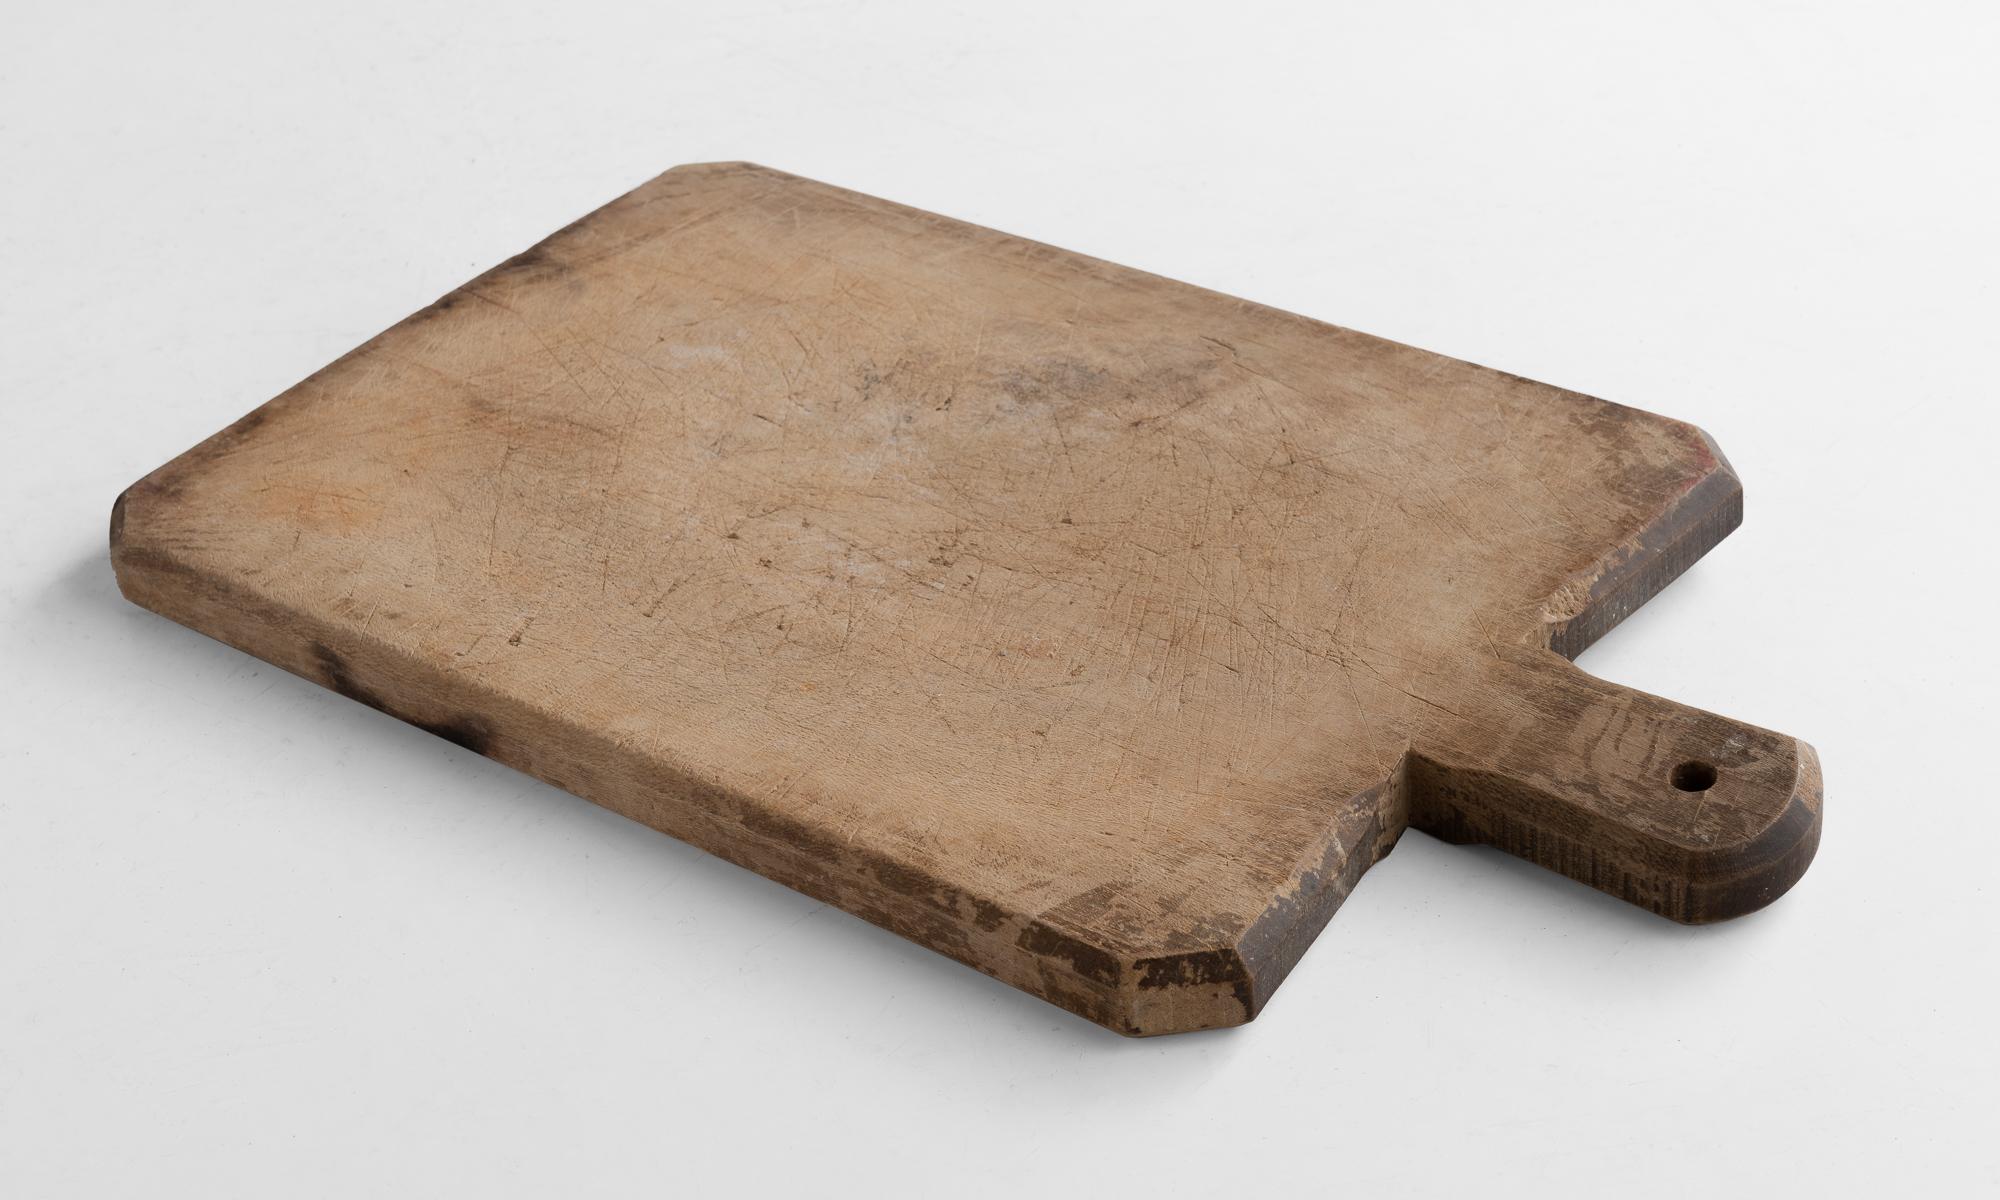 Slab cutting board, circa 1900

Double sided, beautifully worn primitive form with angular features.